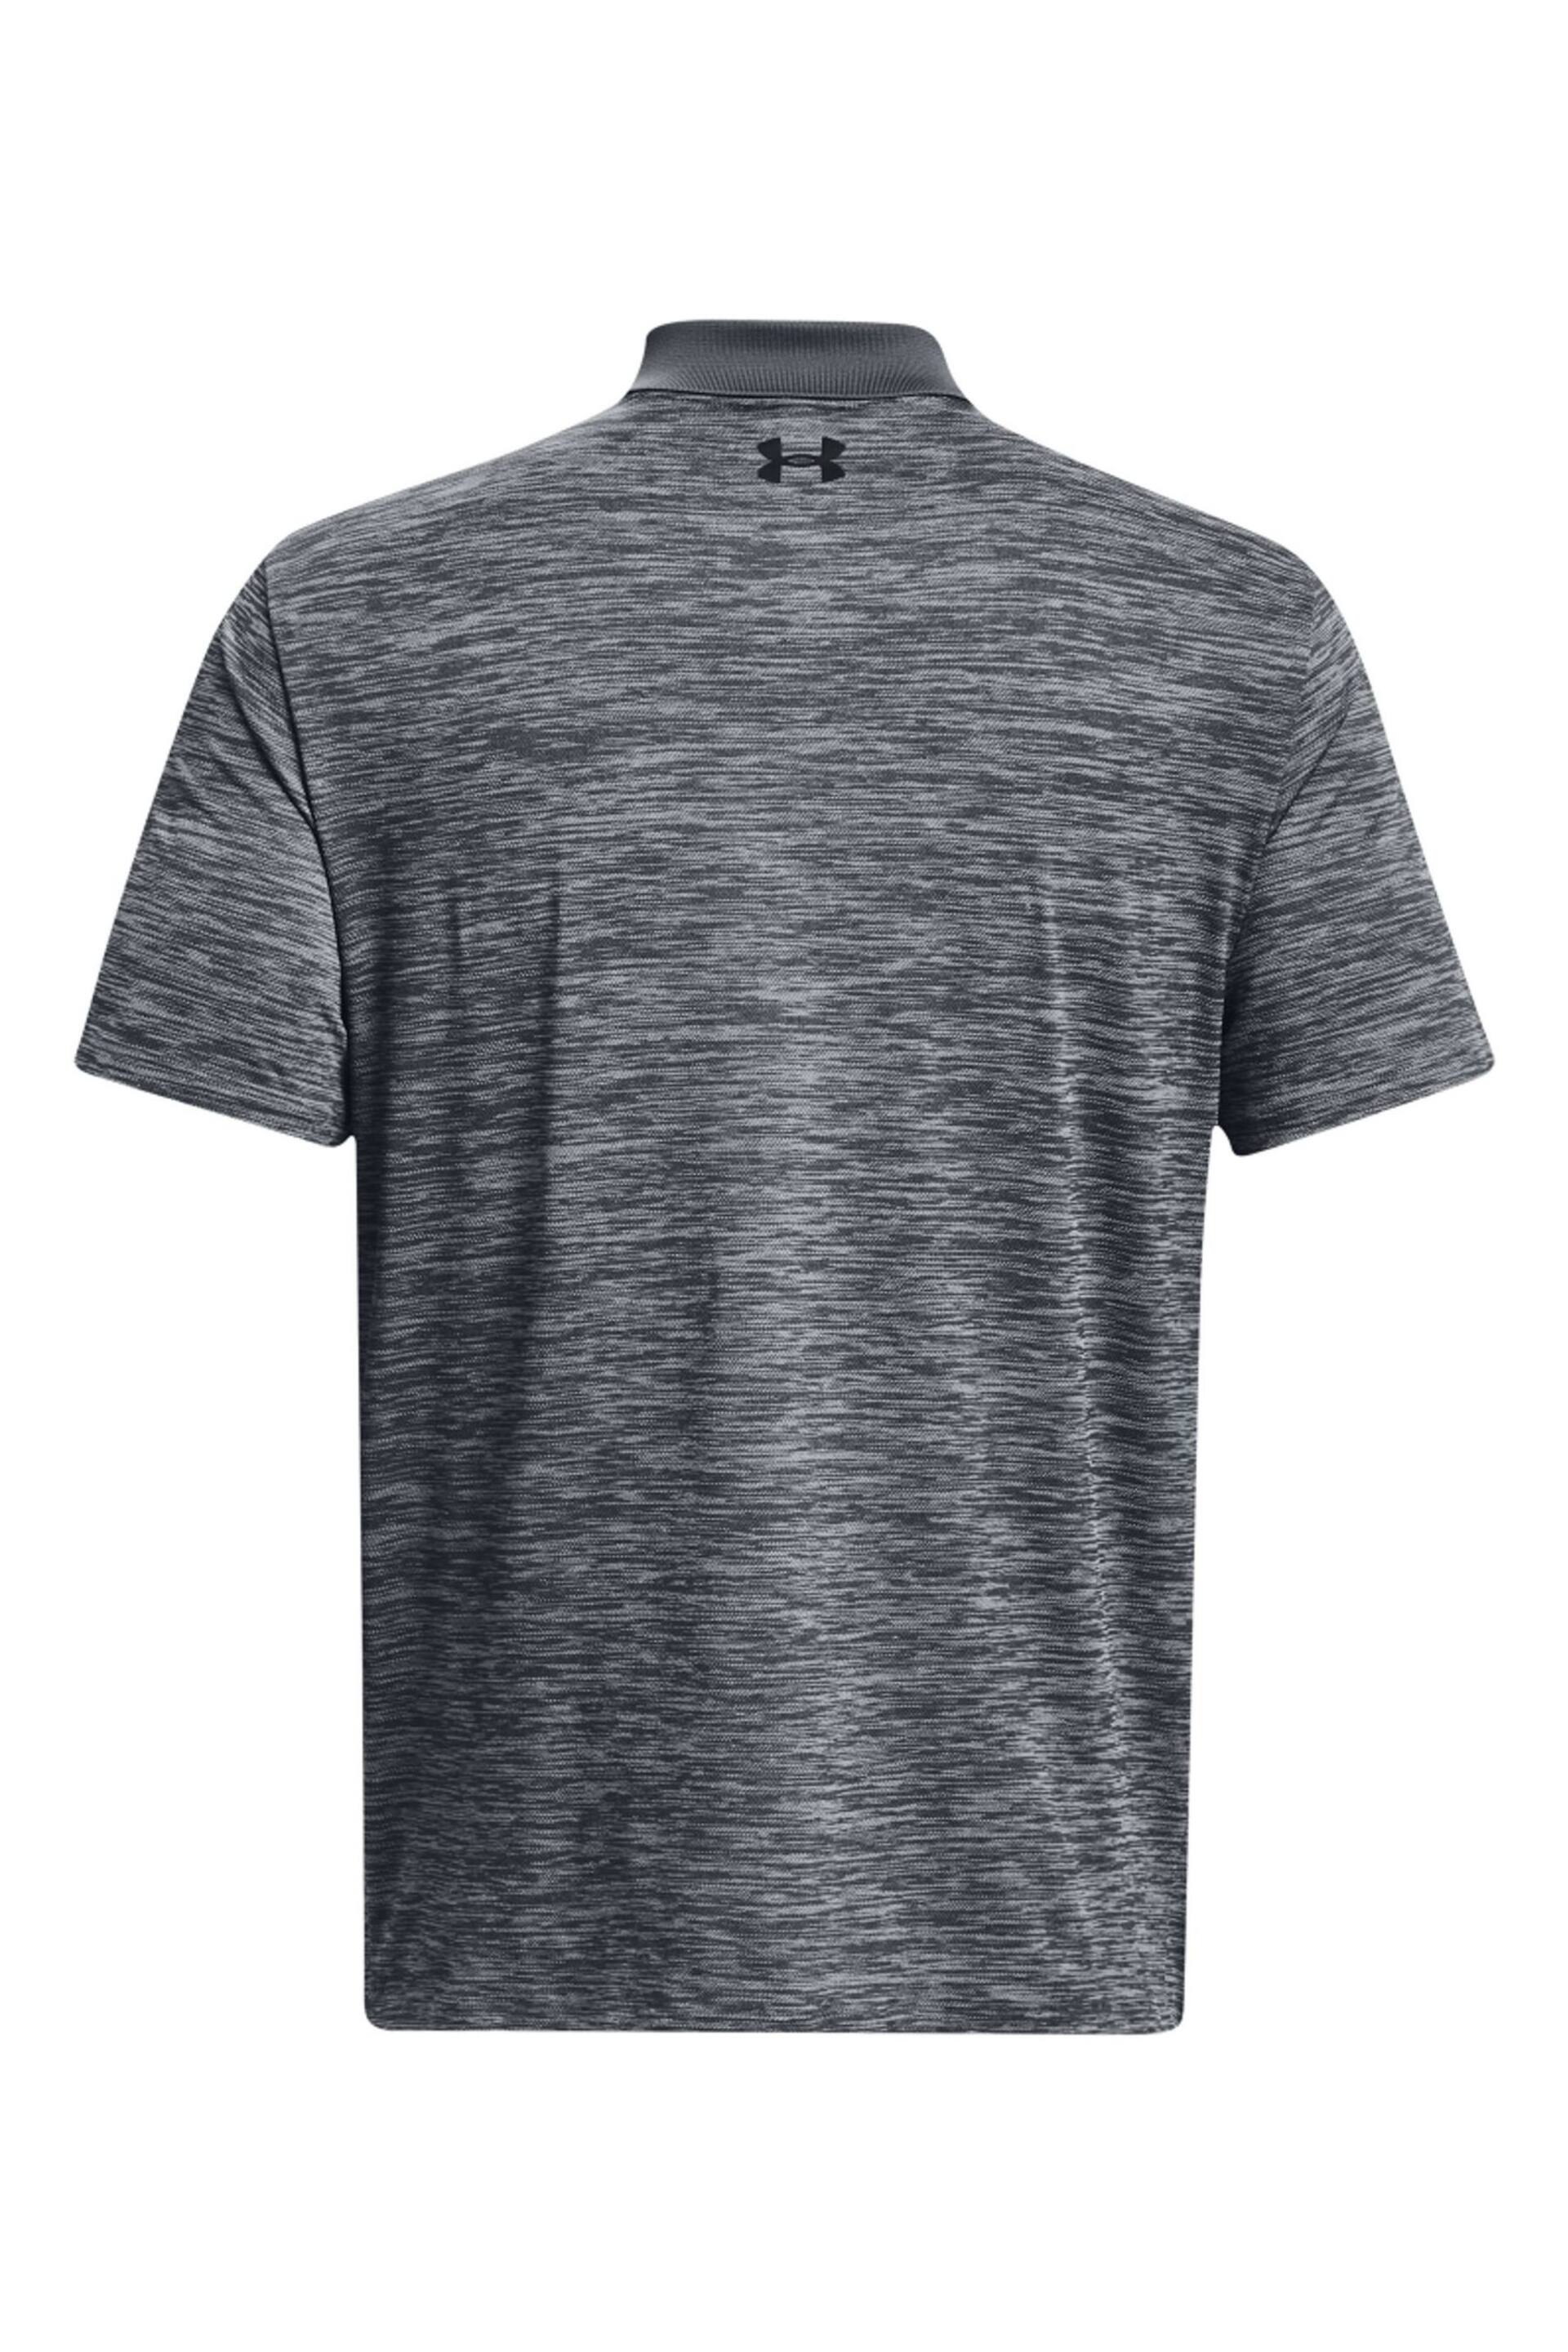 Under Armour Grey/Black Golf Performance Polo Shirt - Image 3 of 6